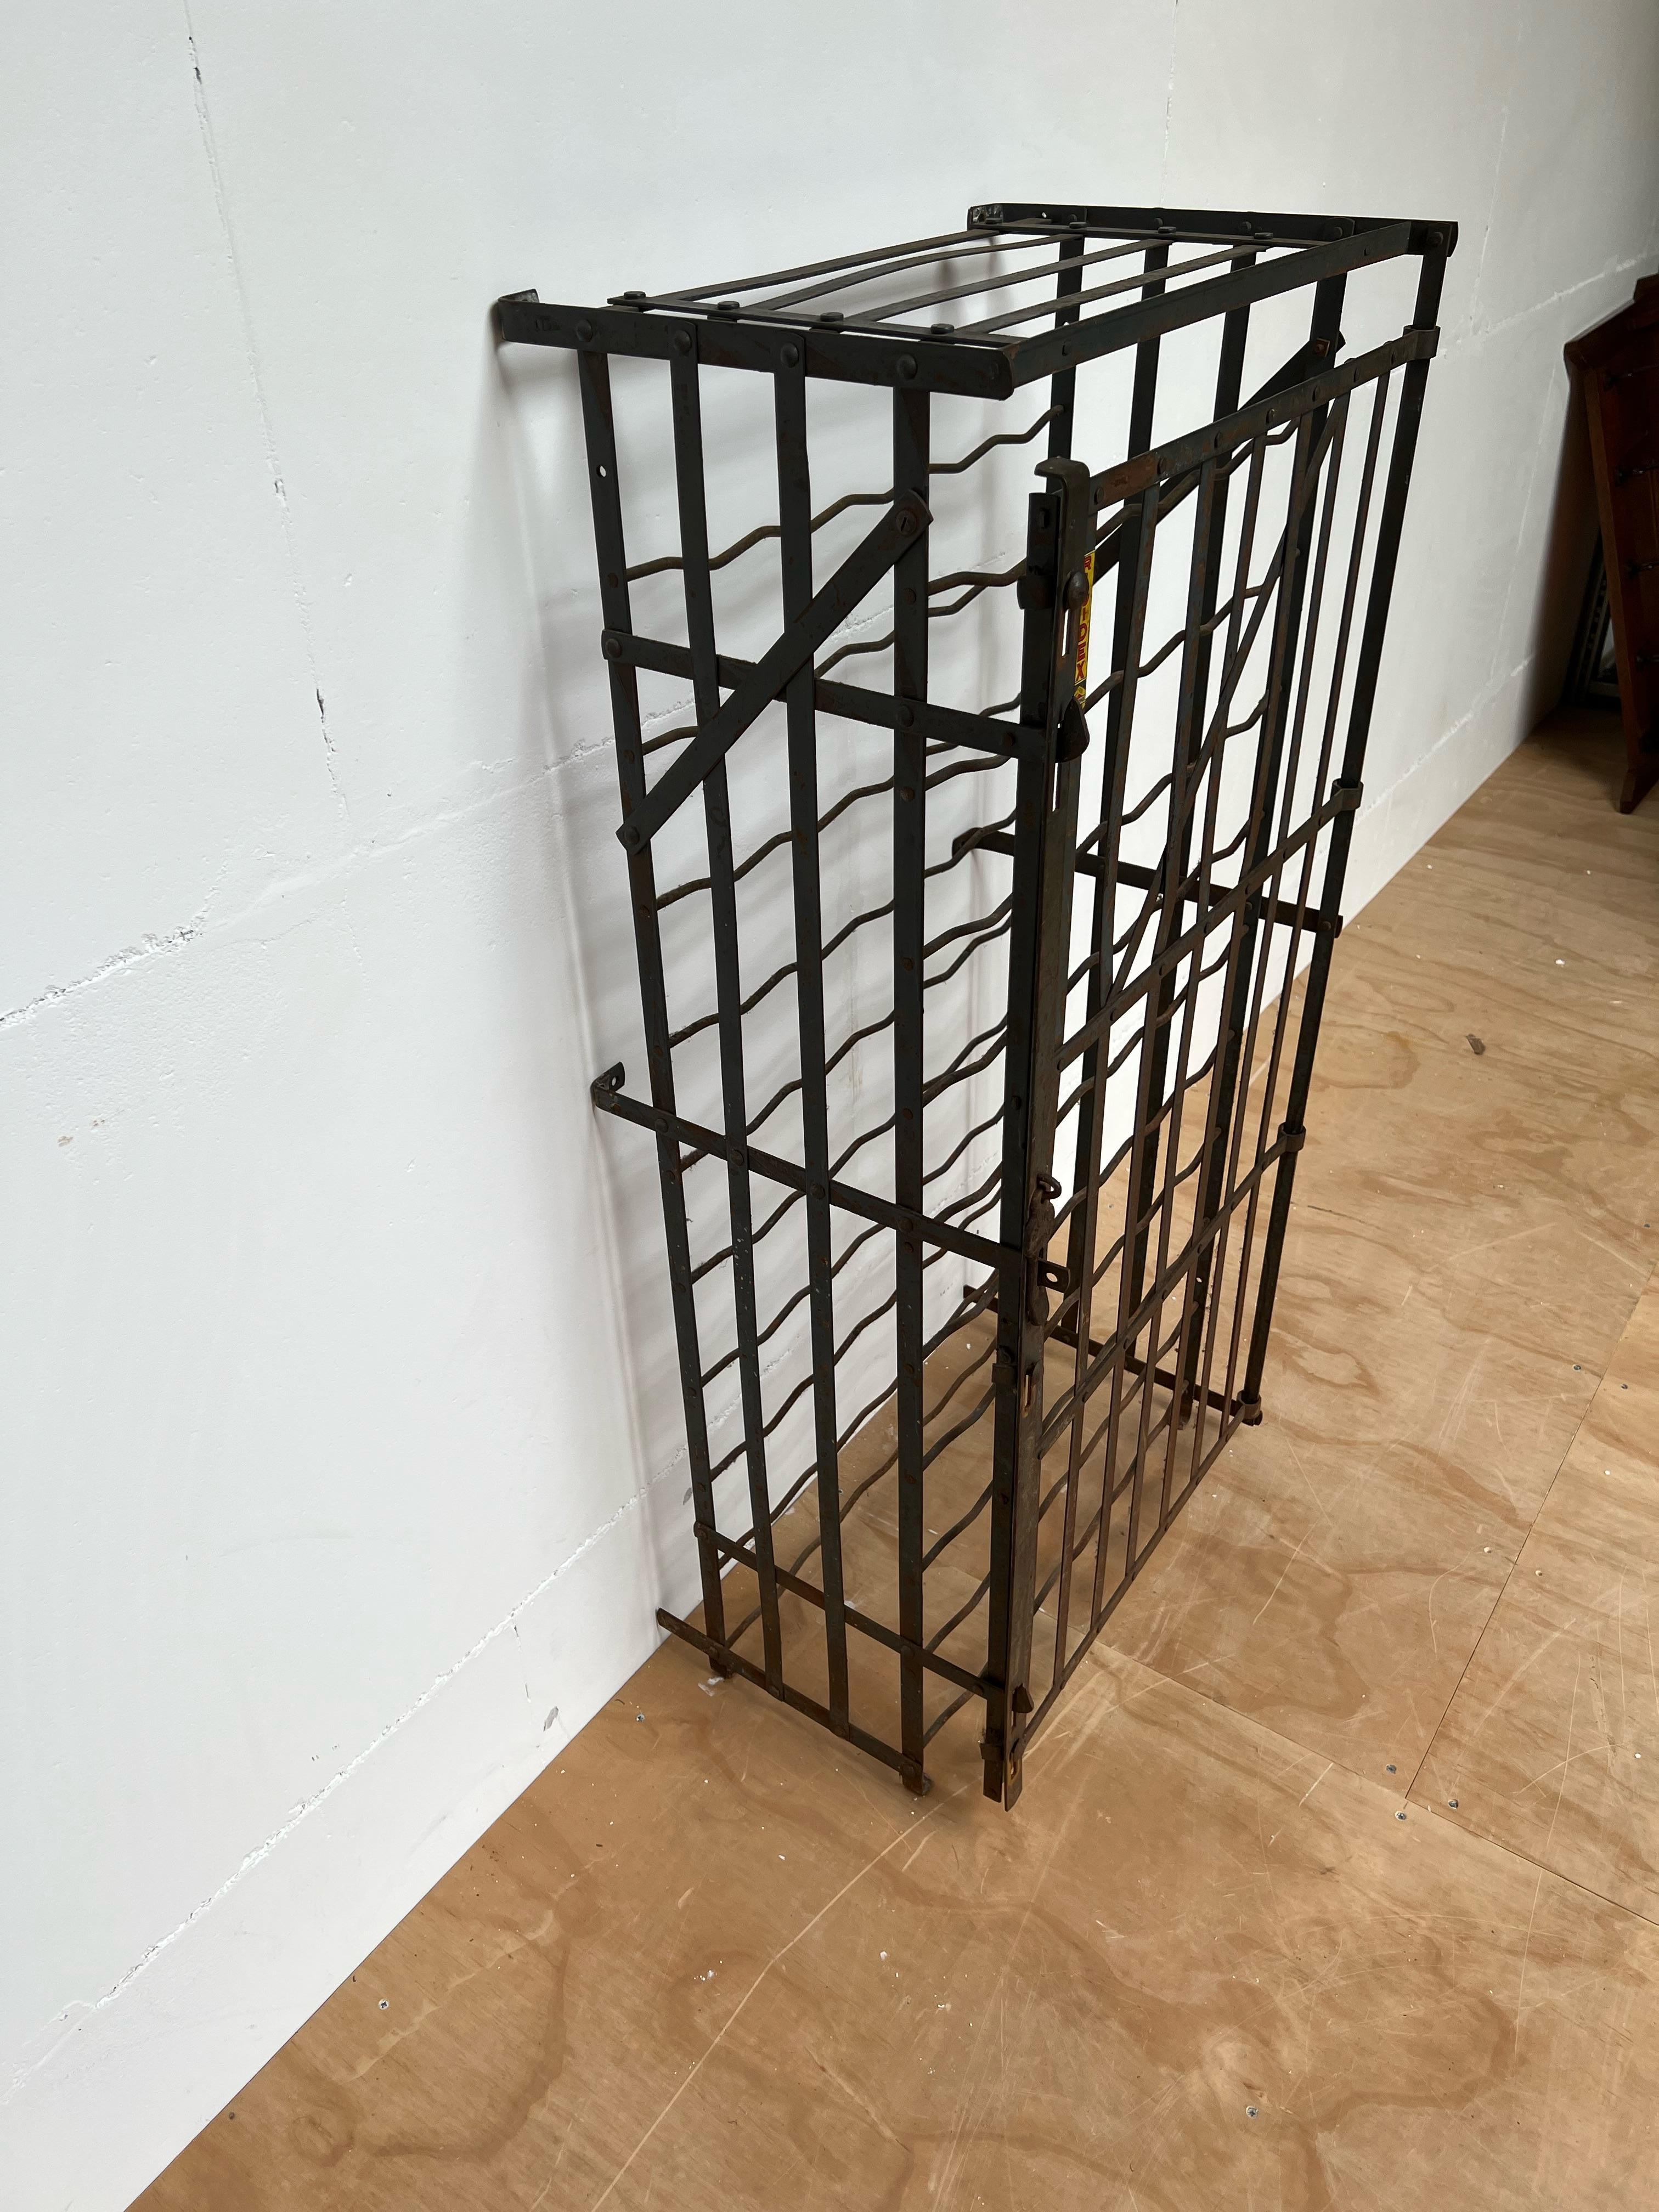 Stylish and practical, Industrial style wine rack.

If you are a wine enthousiast and you like the timeless, industrial style then we may have the ideal wine cabinet for you. This industrial and all hand-crafted metal wine rack has 10 rows for 5